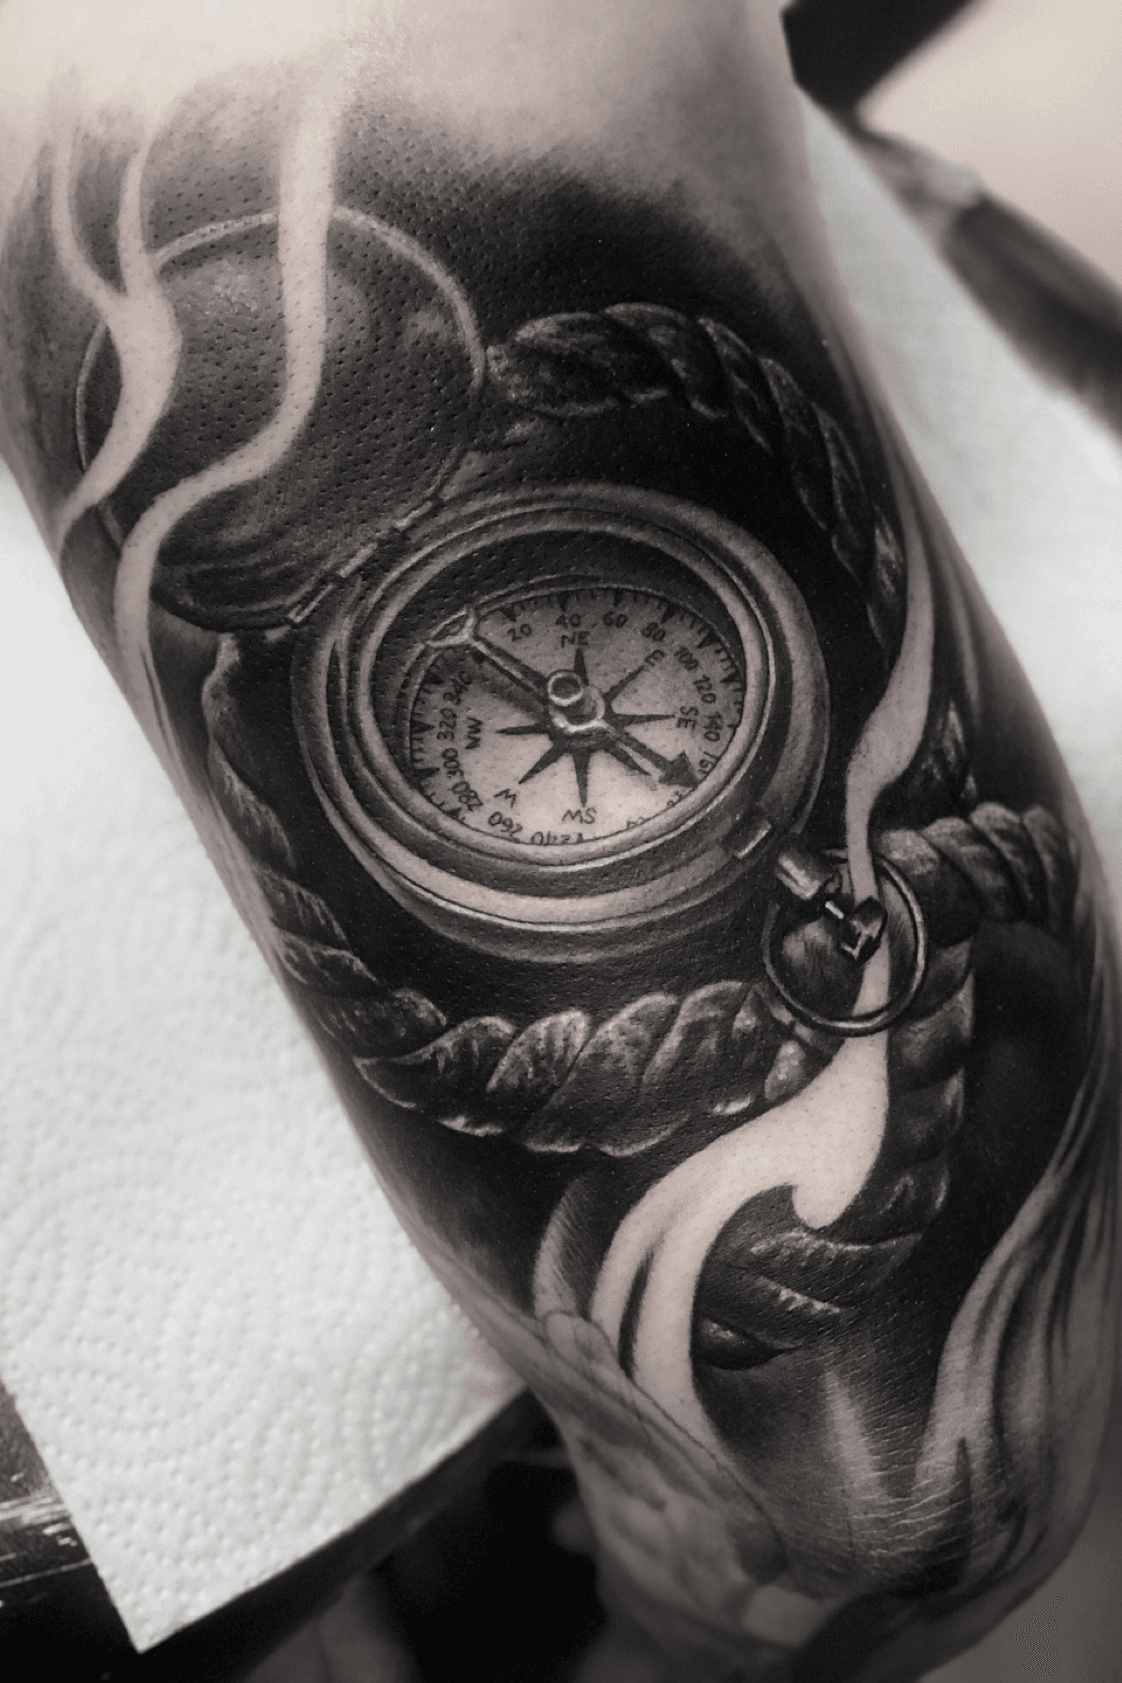 80 Compass Tattoos Meaning Design Ideas For Men  Women  DMARGE